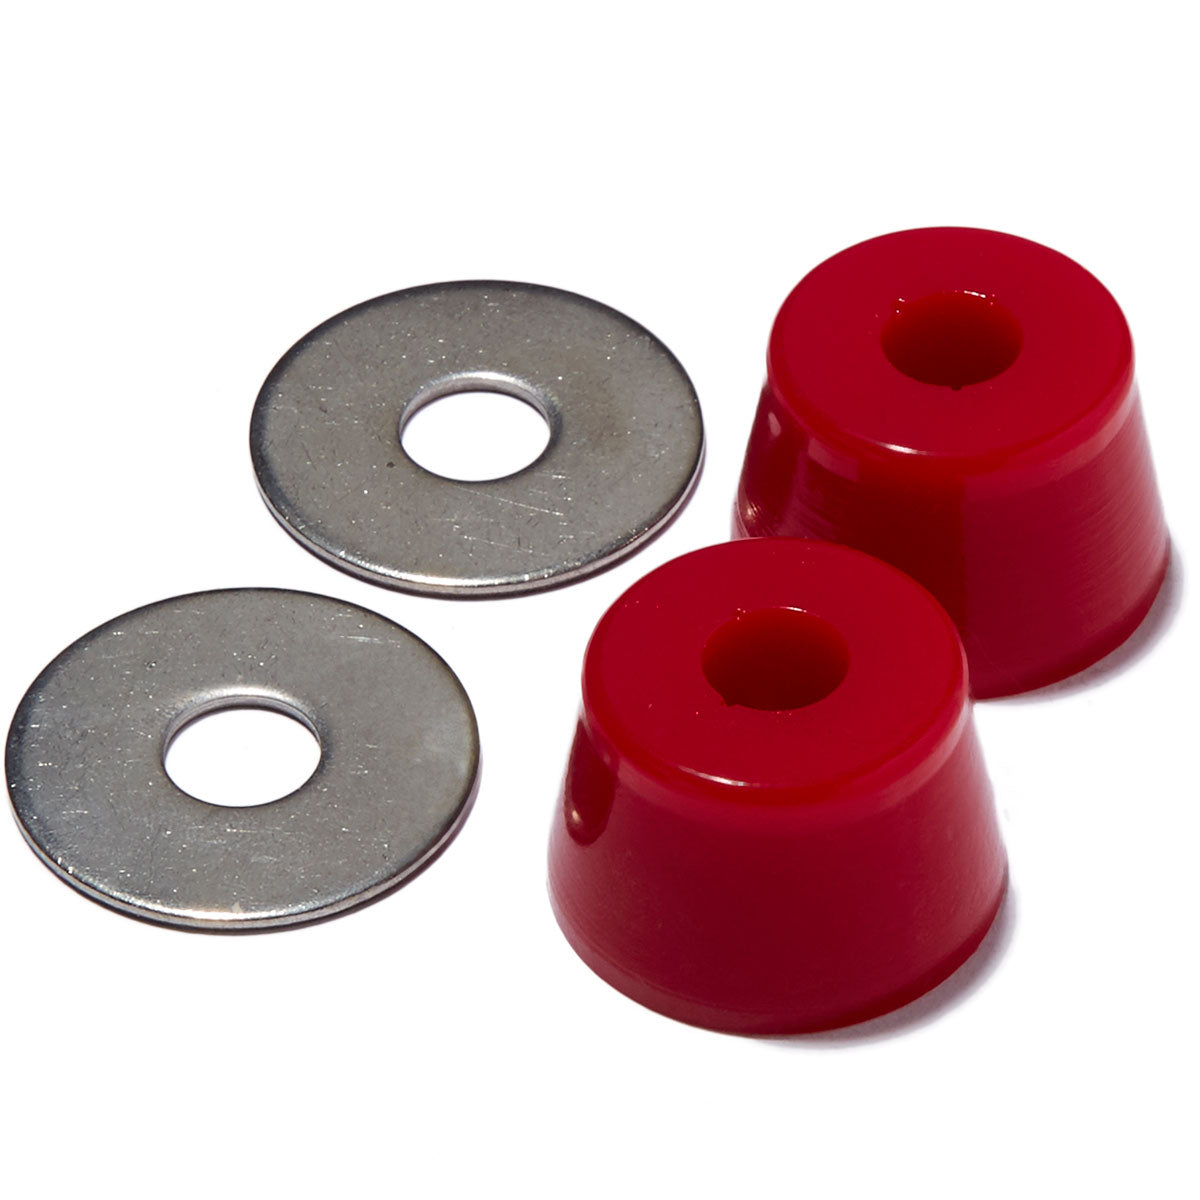 RipTide Tall Fat Cone Bushings - APS 95a image 1